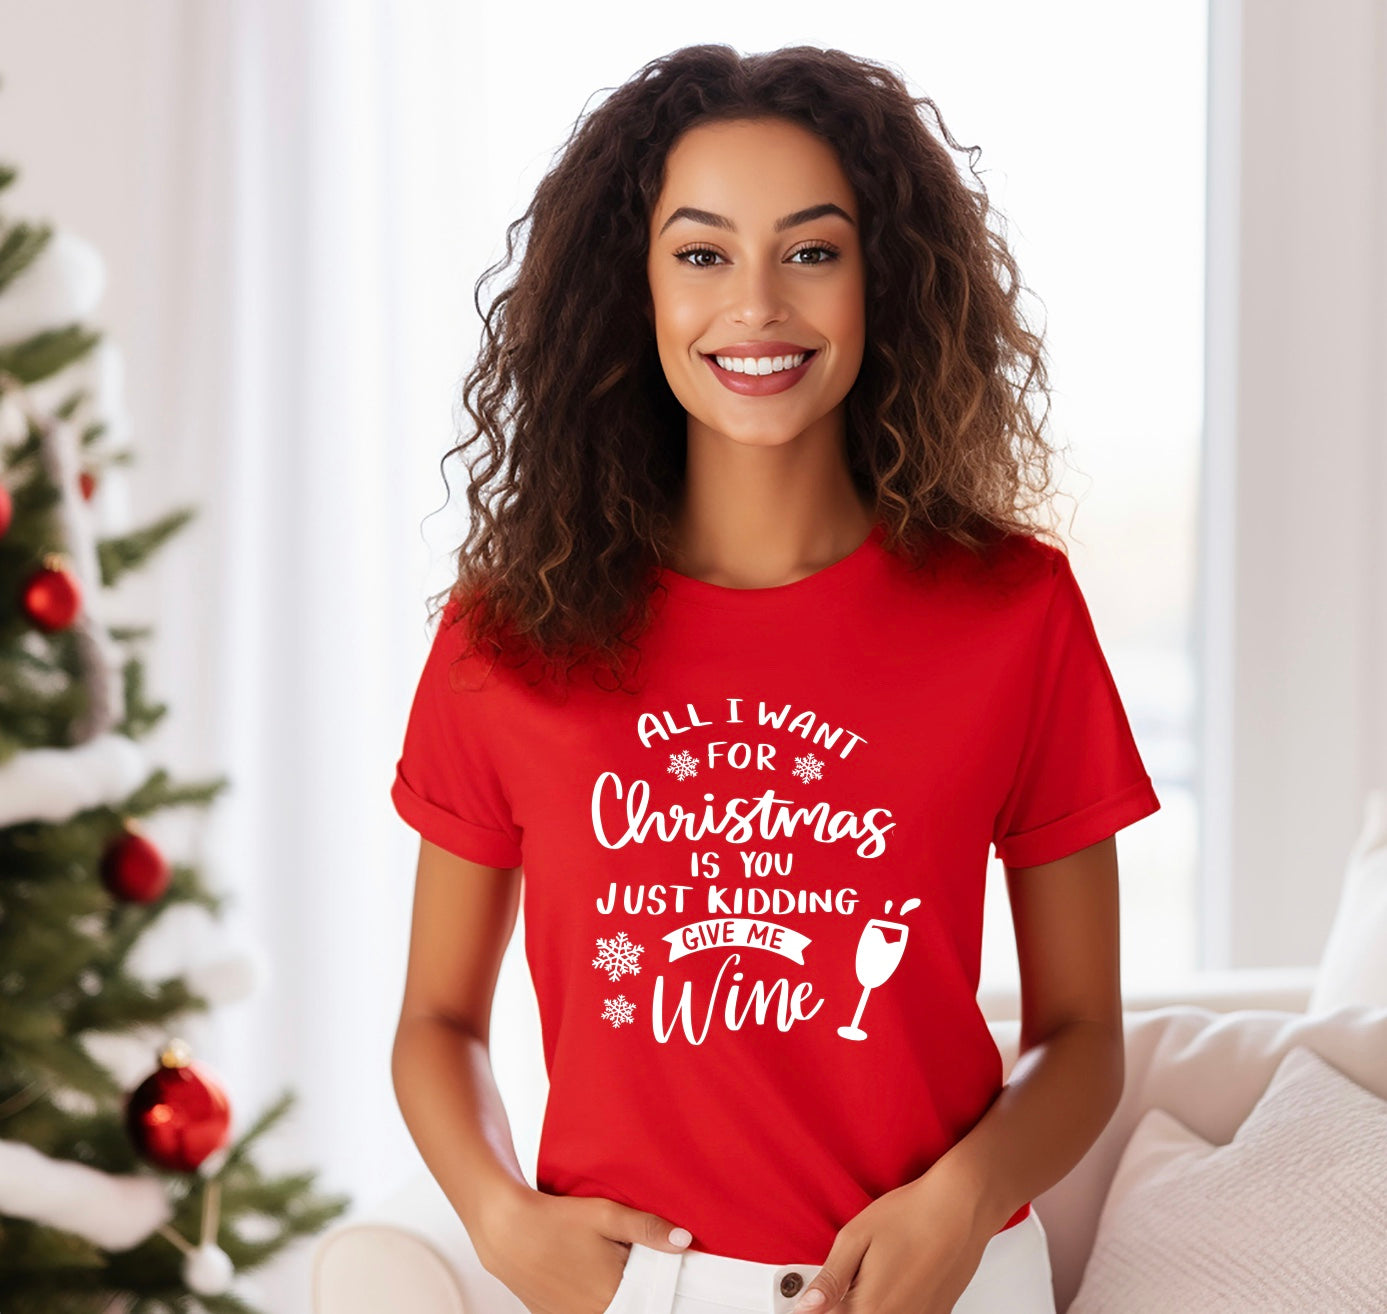 All I want for Christmas is you just kidding give me wine t-shirt In red